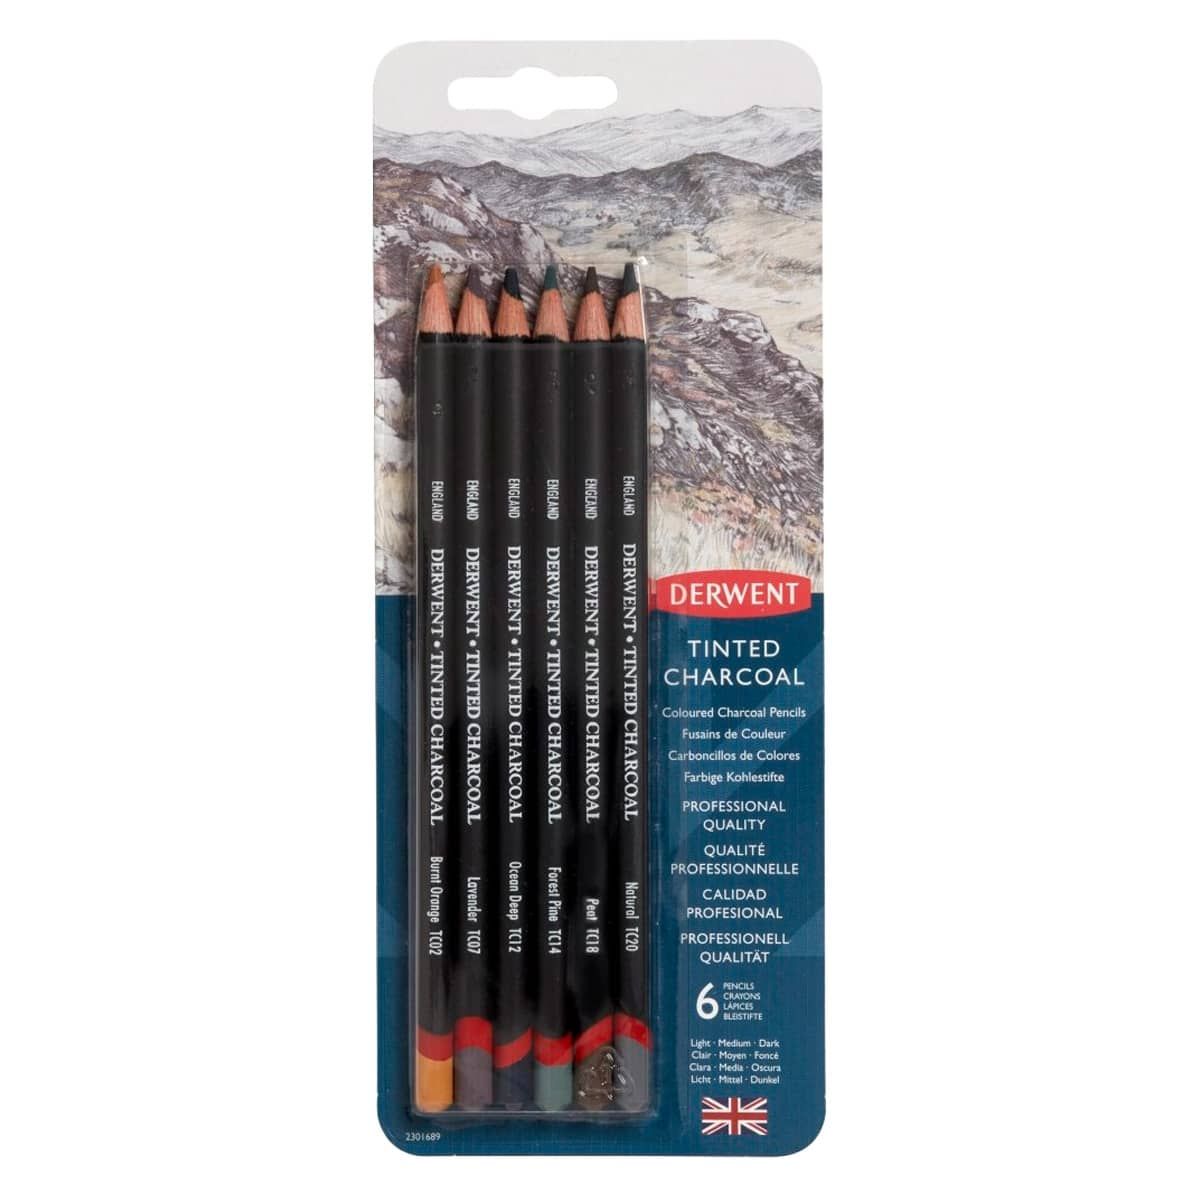 Tinted Charcoal Pencils 6 Count (4mm Core)